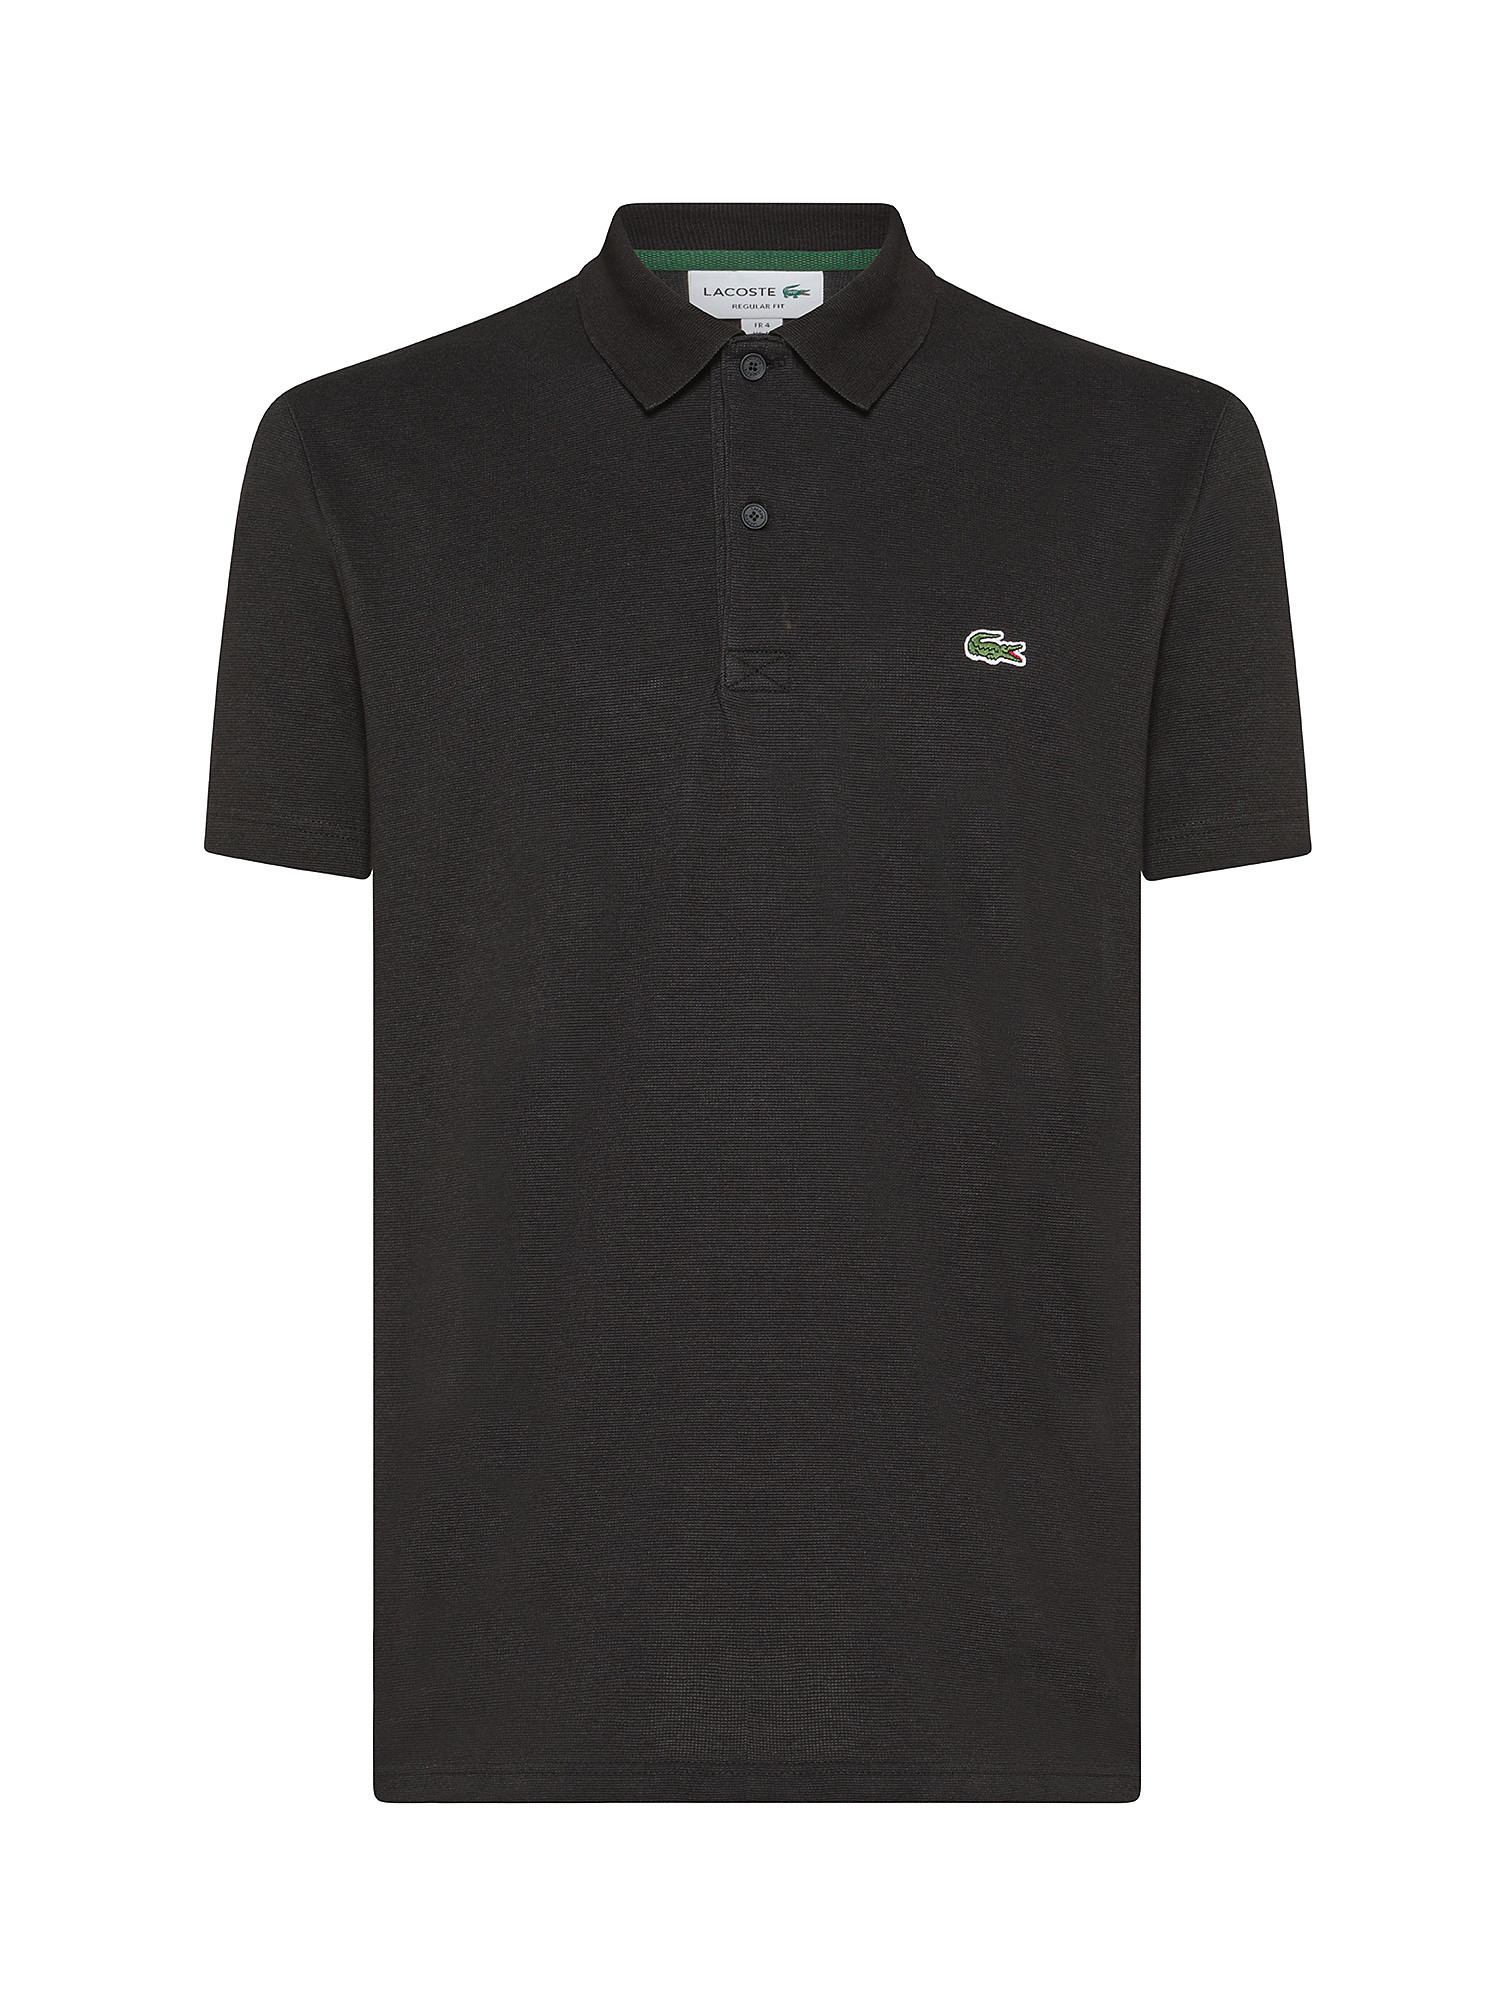 Lacoste - Regular fit stretch polo, Black, large image number 0